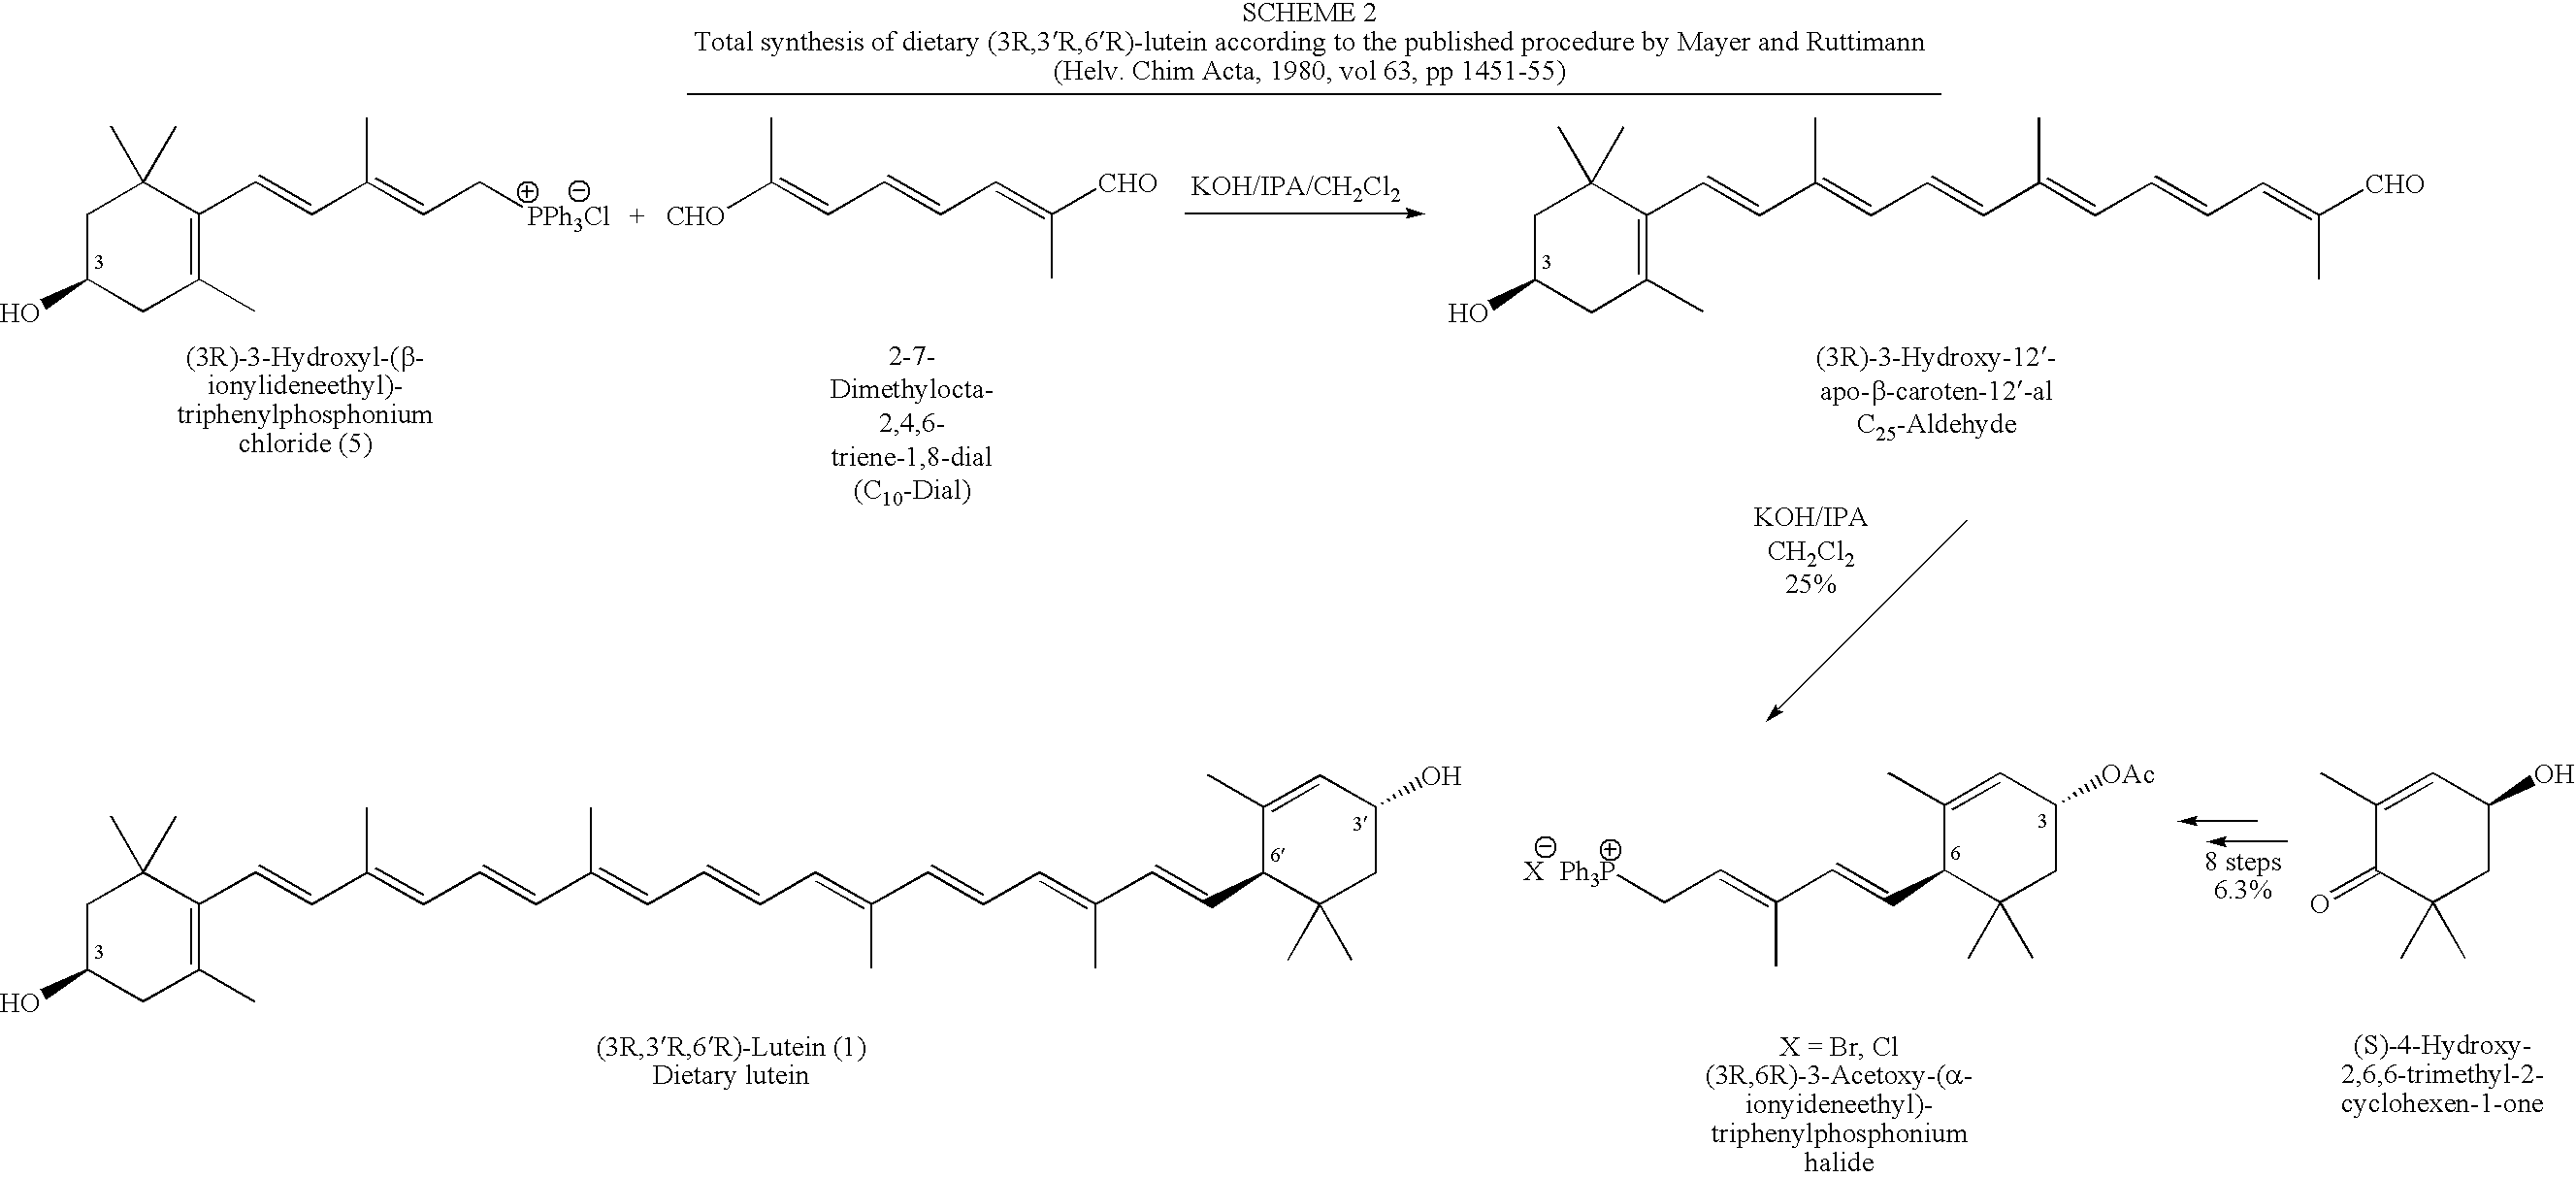 Process for Synthesis of (3R,3'R,6'R)-Lutein and its Stereoisomers